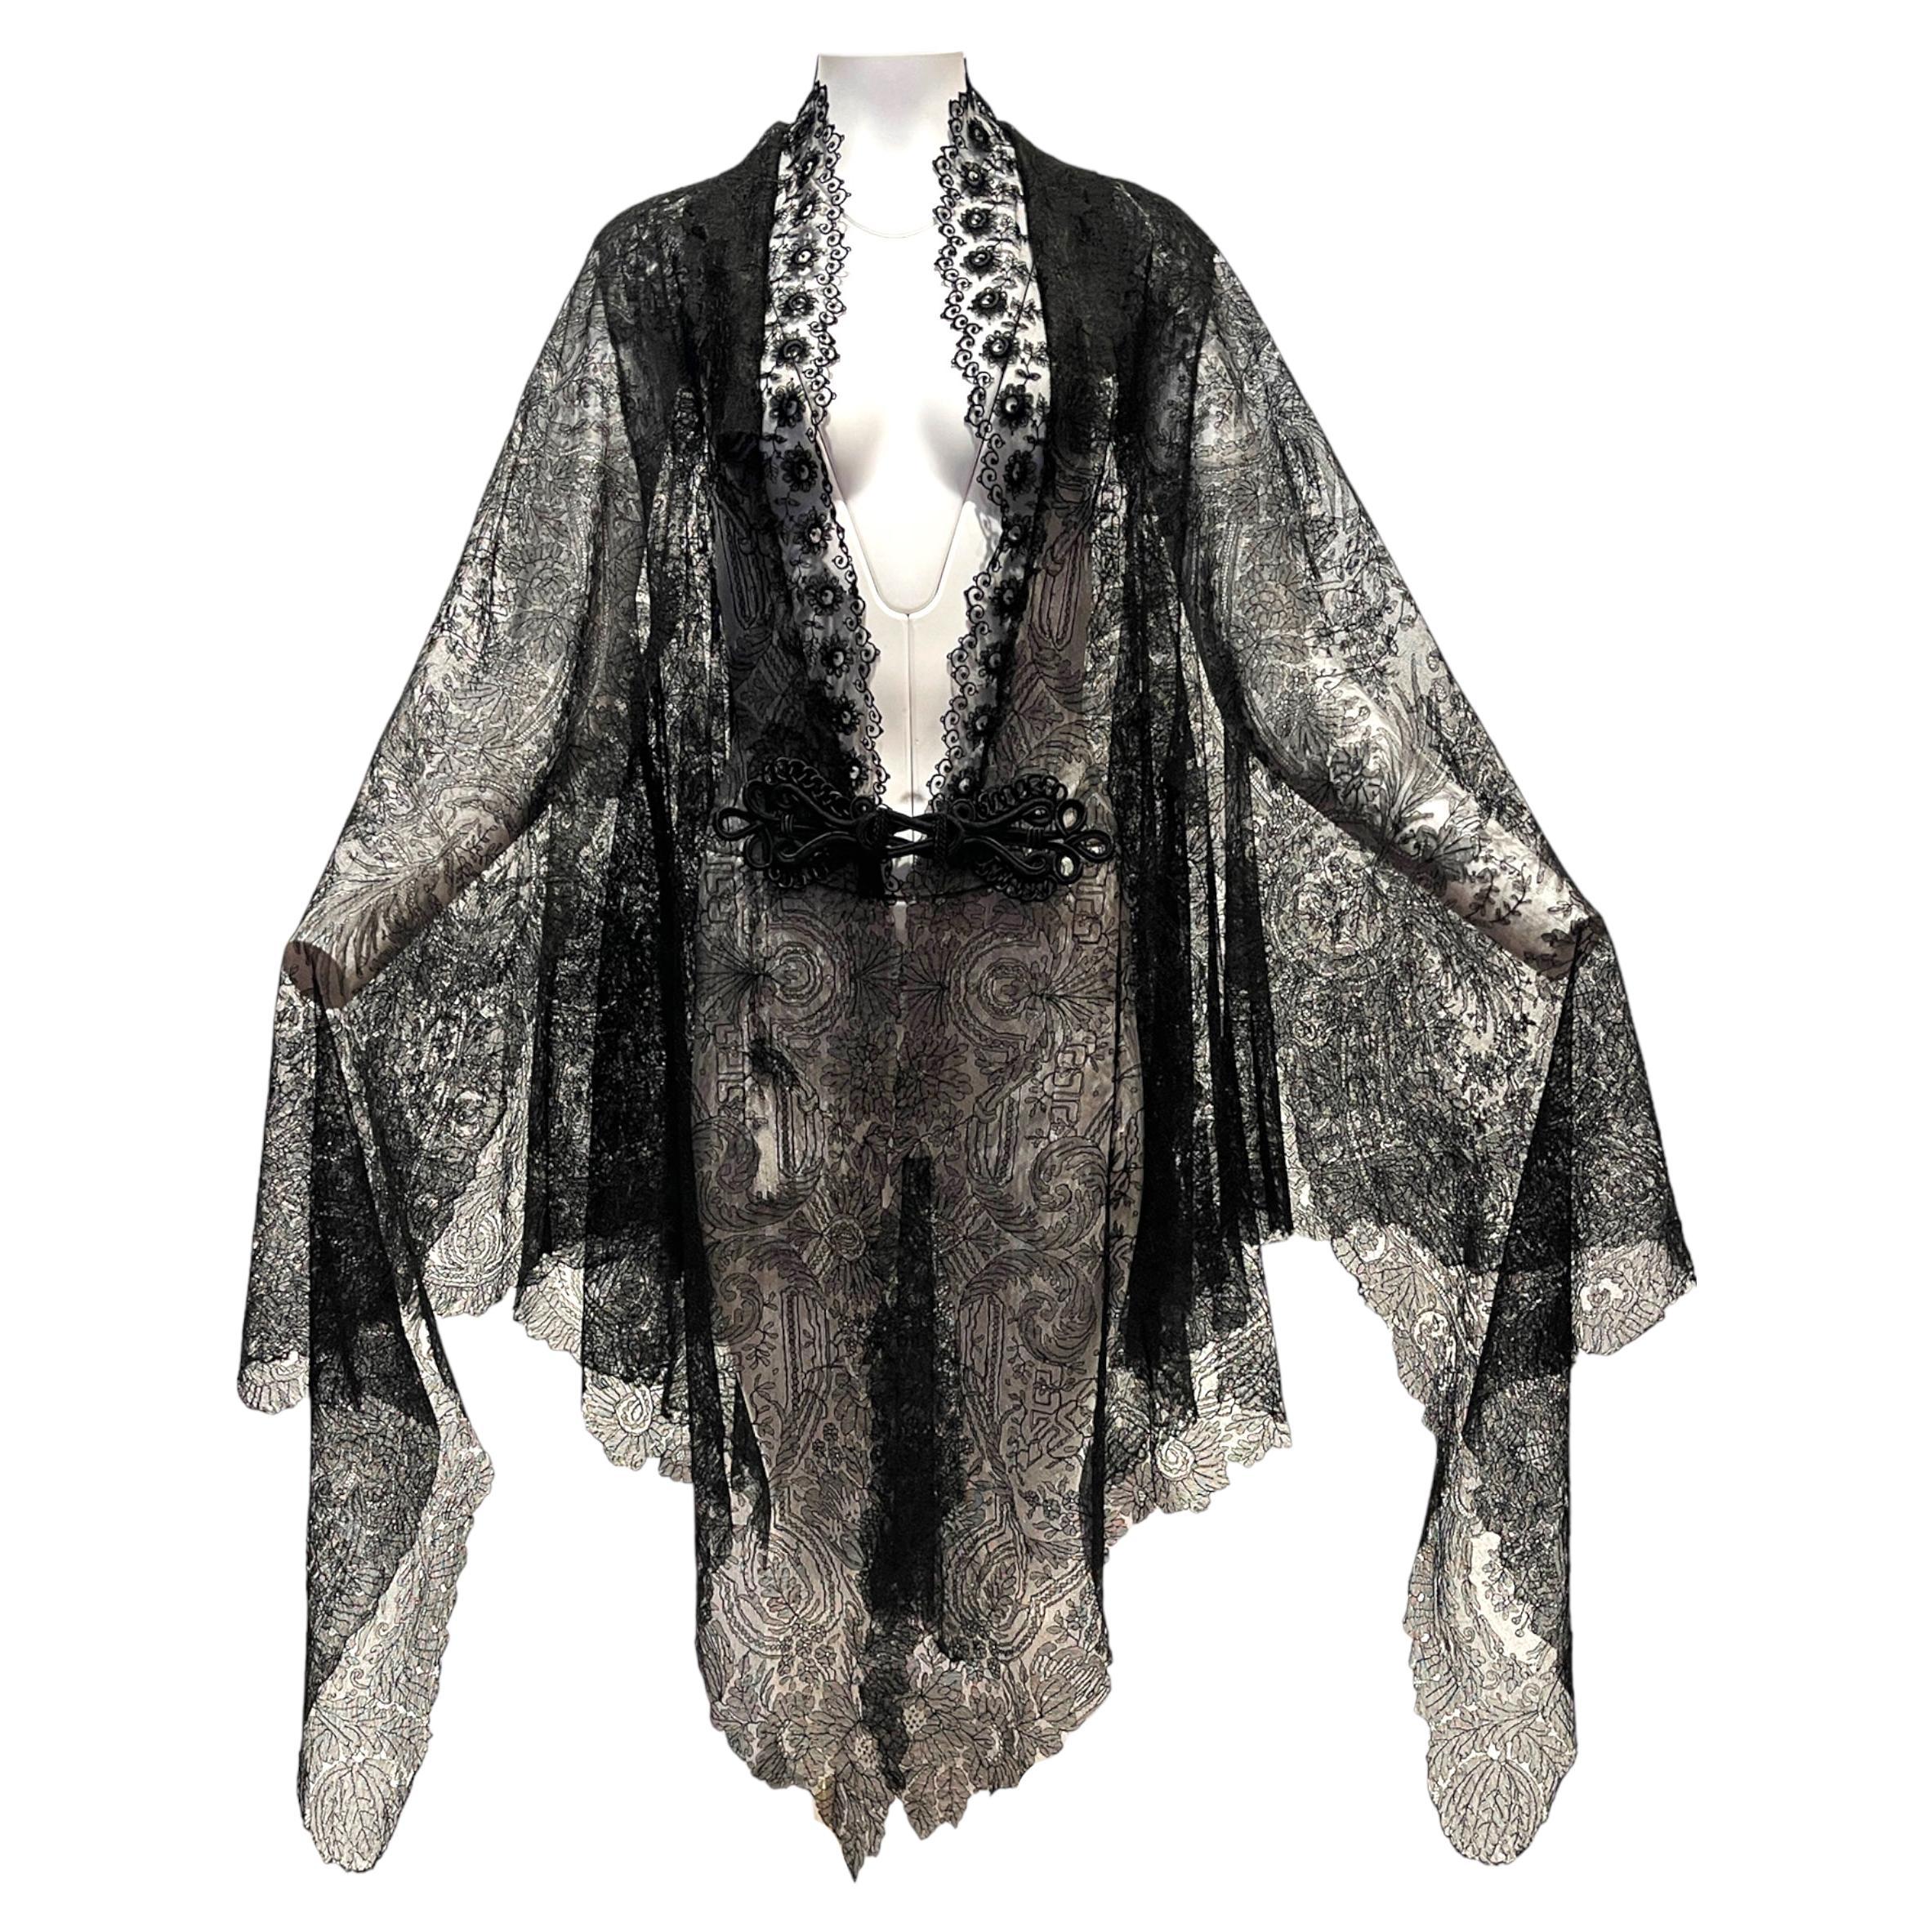 MORPHEW ATELIER Black Antique Silk Chantilly Lace Caped Duster For Sale